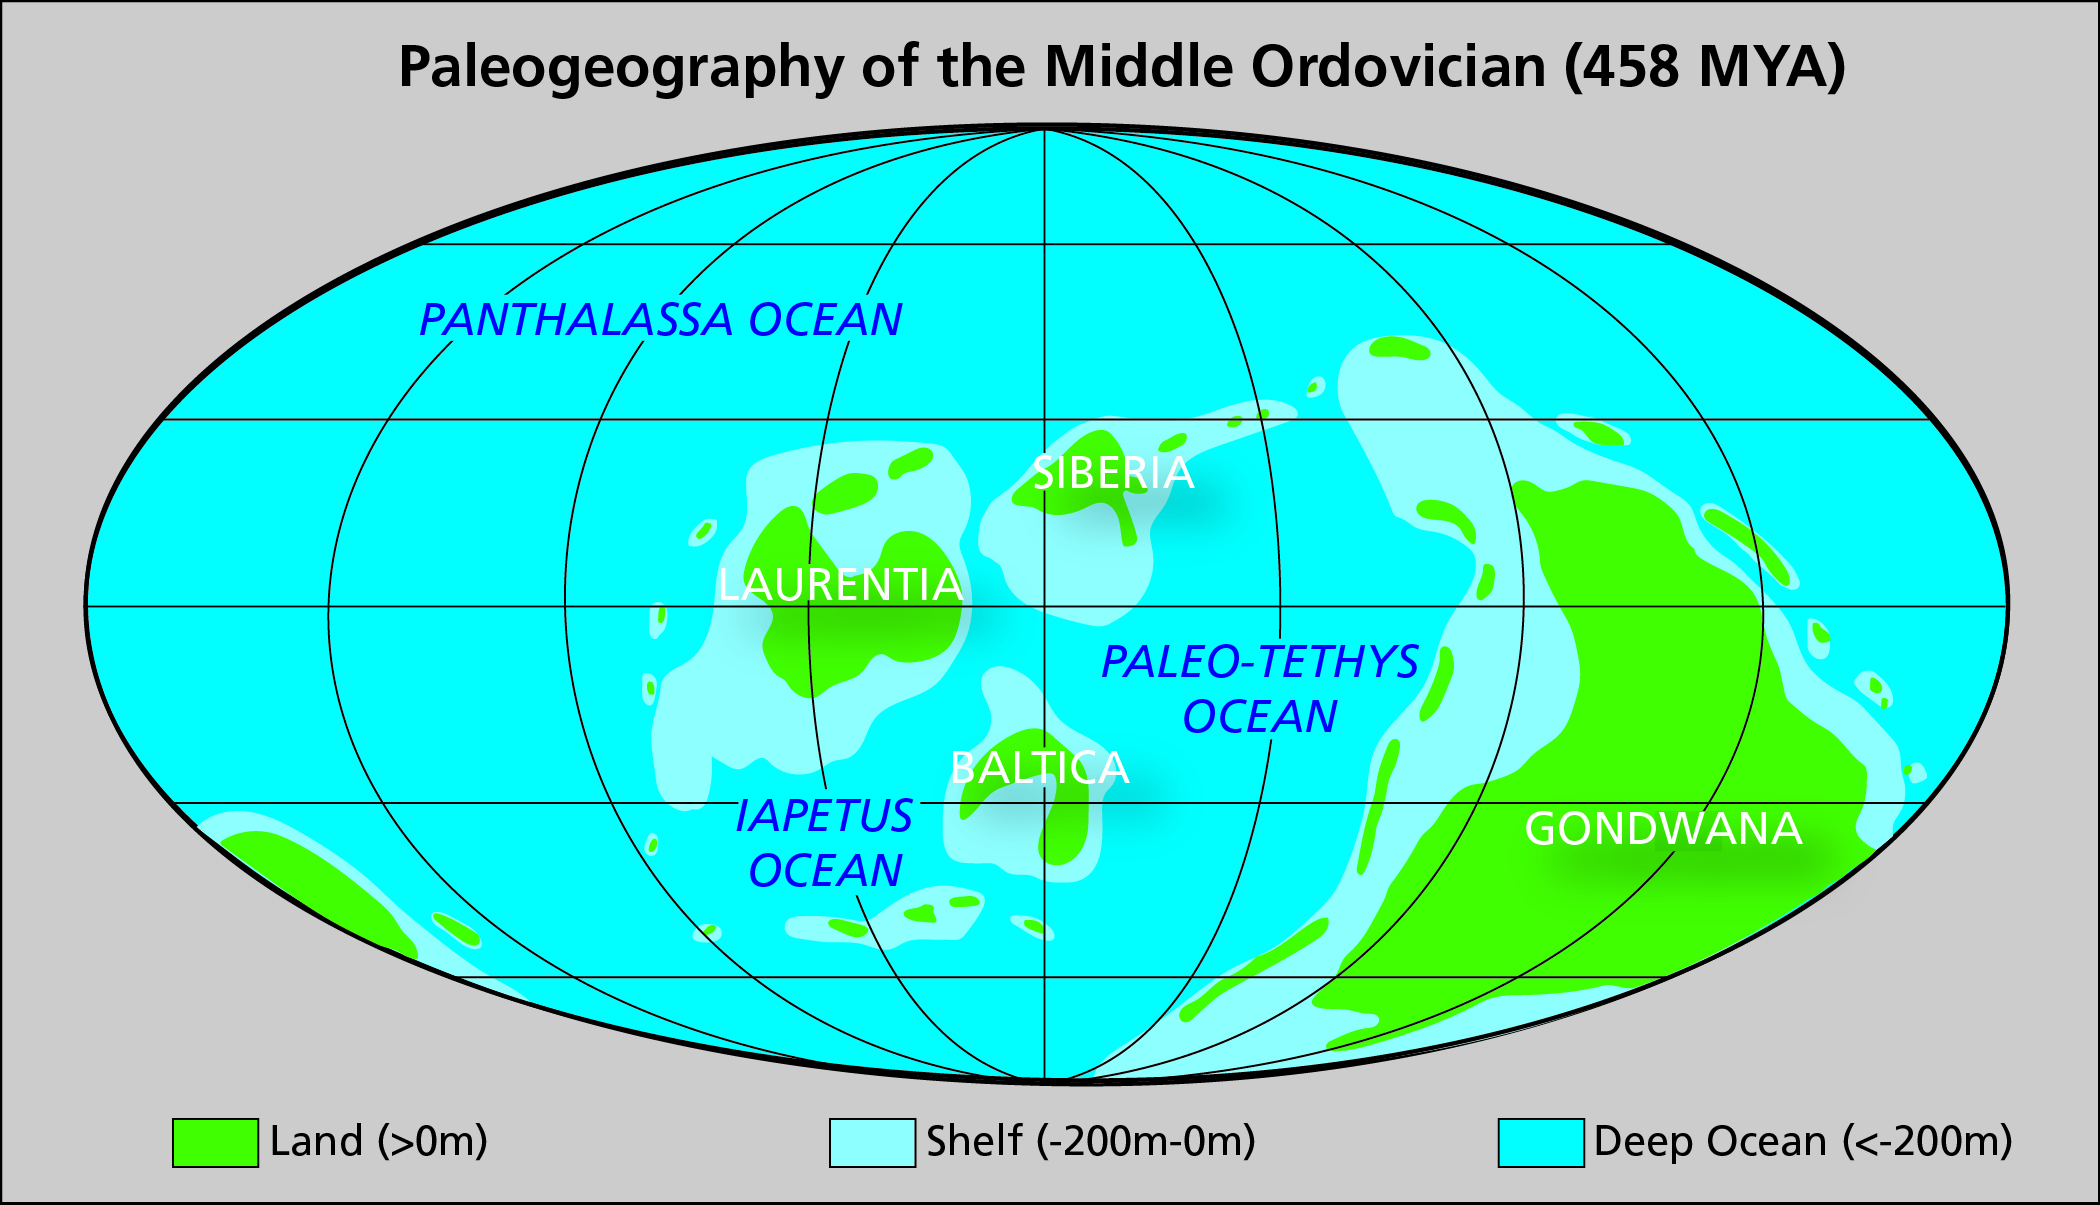 Global map showing the location of extant continents of the Middle Ordovician. Labeled landmasses include Laurentia, Siberia, Baltica, and Gondwana; labeled oceans include Panthalassa, Paleo-Tethys, and Iapetus. 